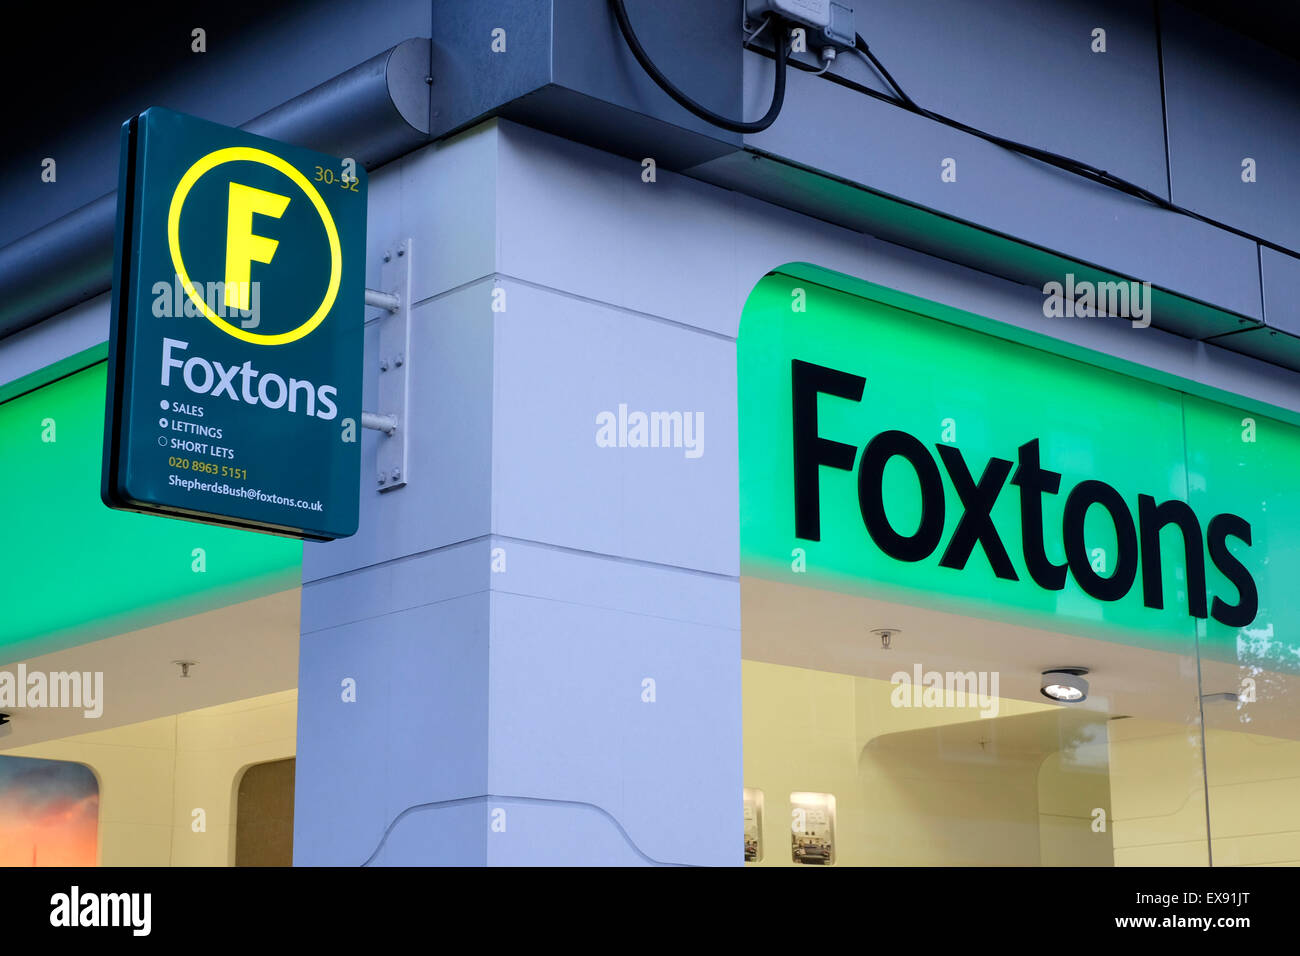 A close-up view of Foxtons in Shepherd’s Bush Stock Photo